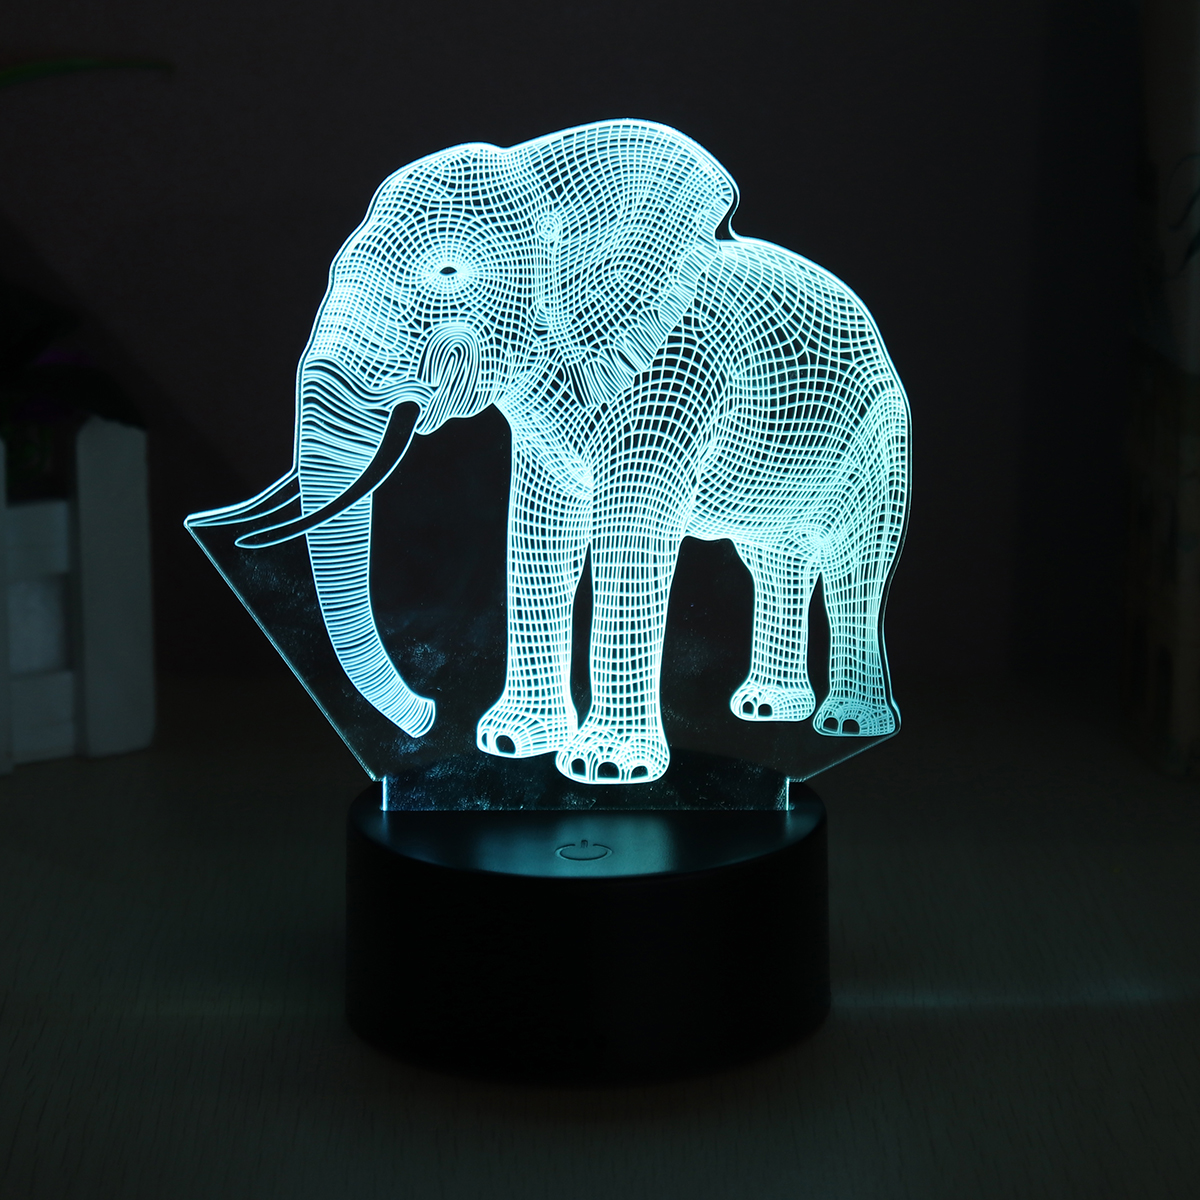 3D-Acrylic-LED-716-Colors-Colorful-Night-Lights-Elephant-Model-Remote-Control-Touch-Switch-Night-Lig-1370467-8